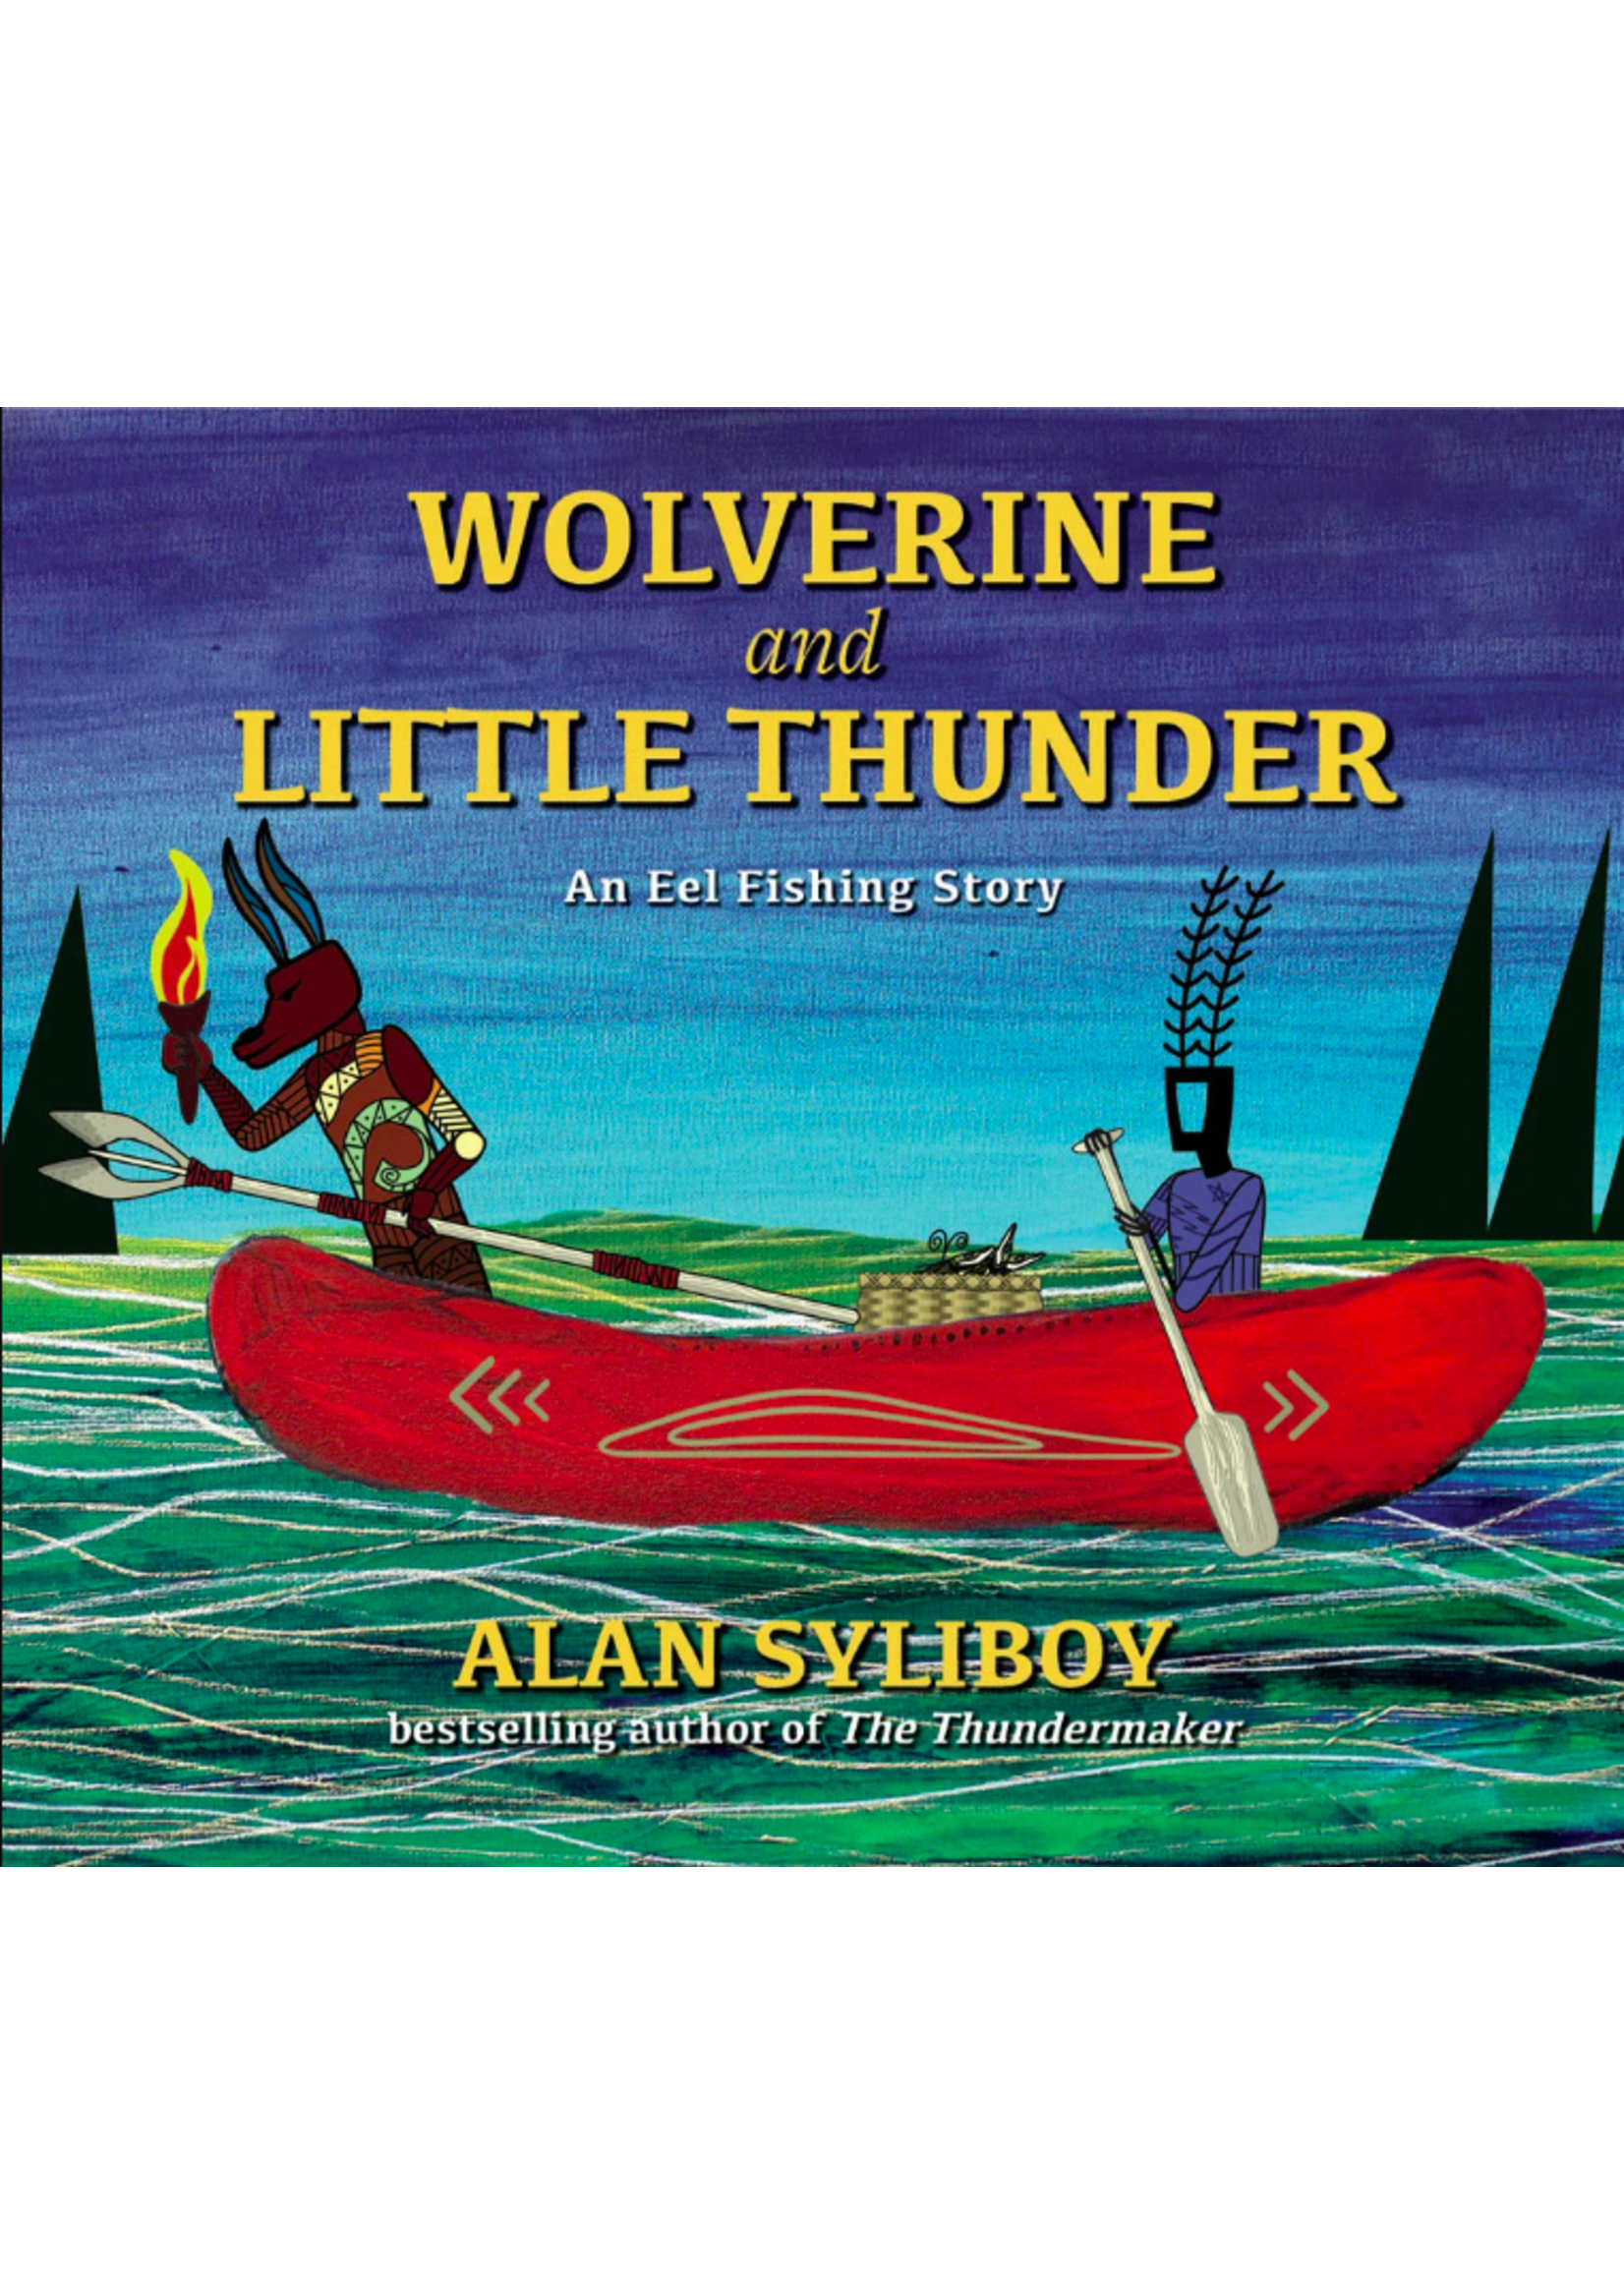 Wolverine and Little Thunder by Alan Syliboy